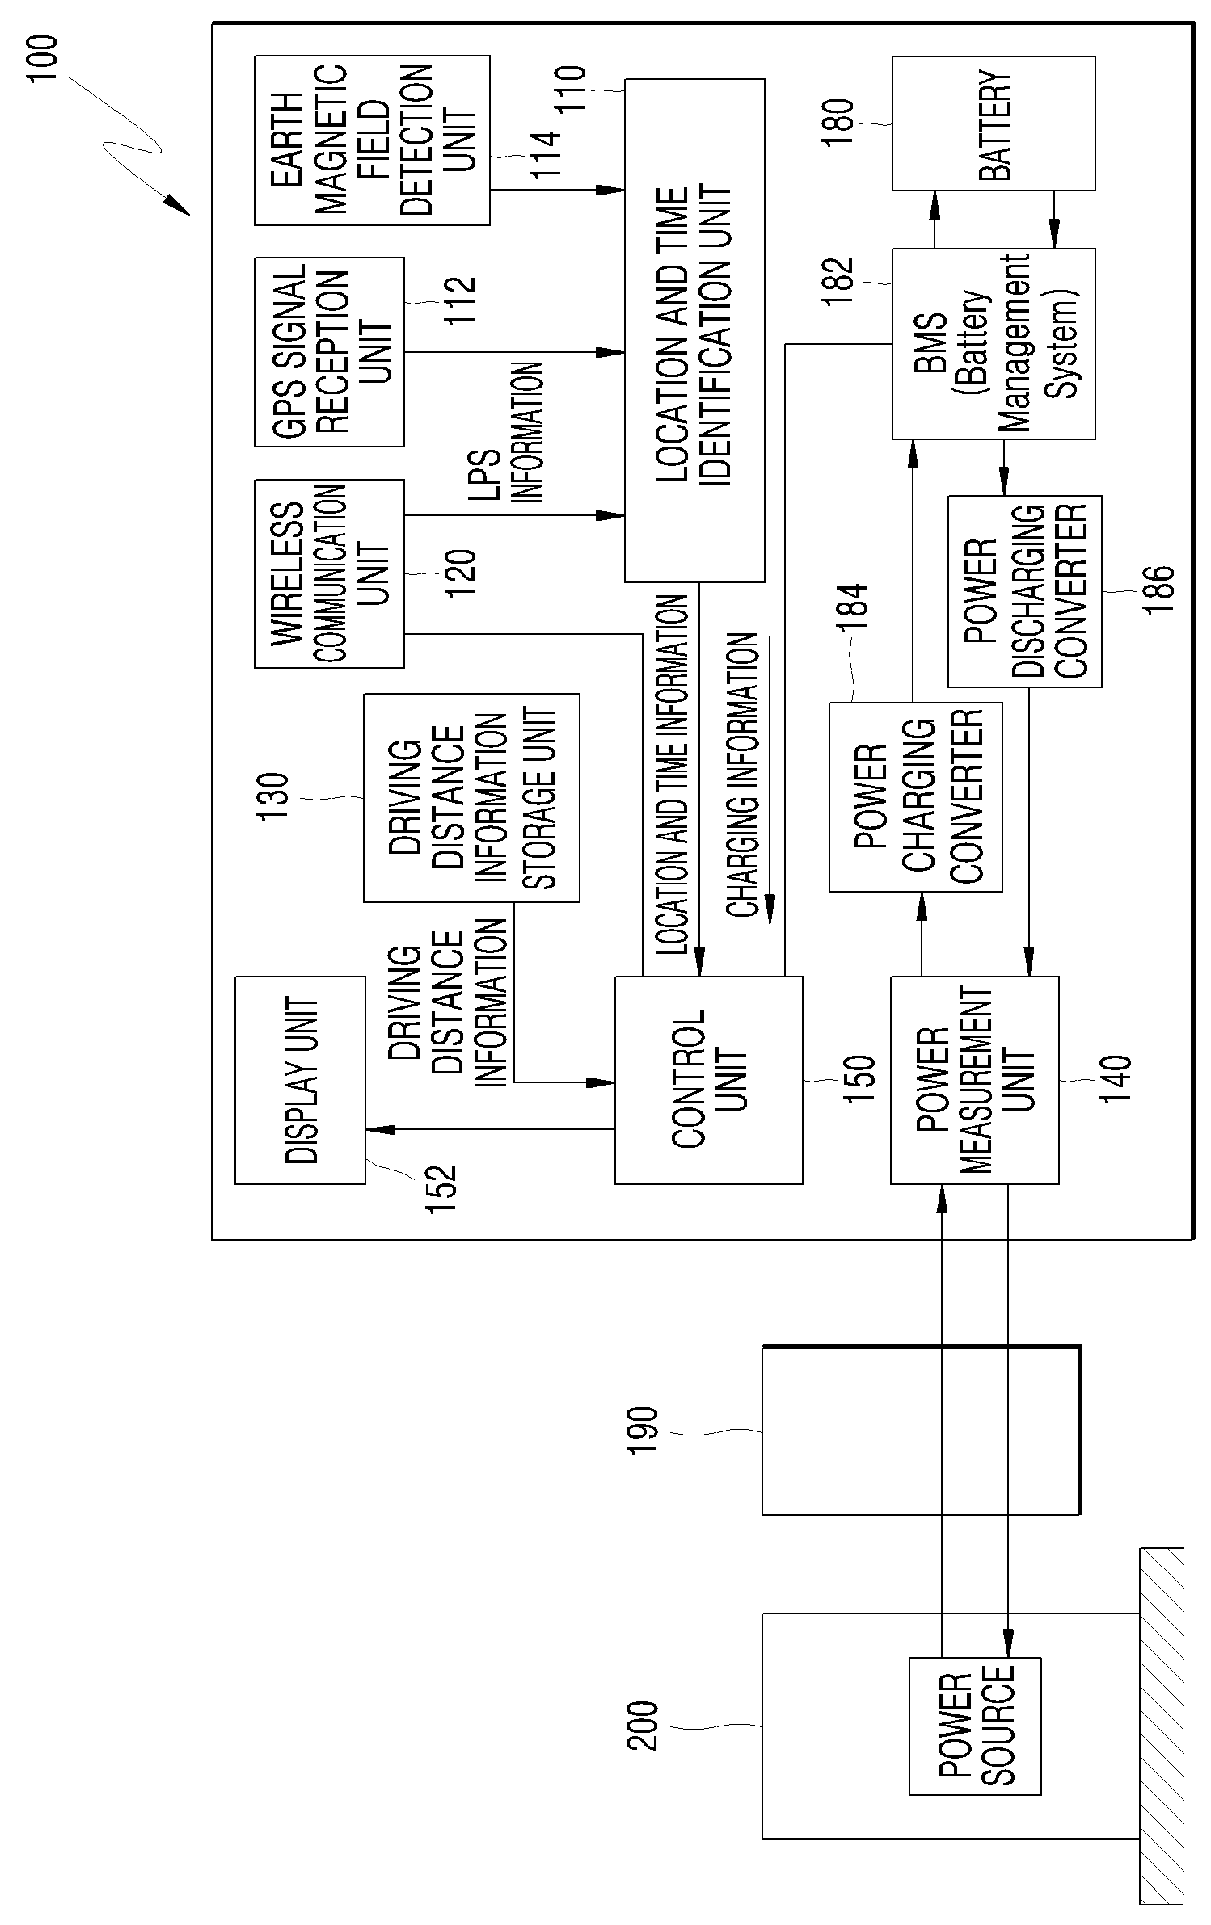 Location-based electric power mediation module, electric vehicle, mediation server, and user certification socket or connector